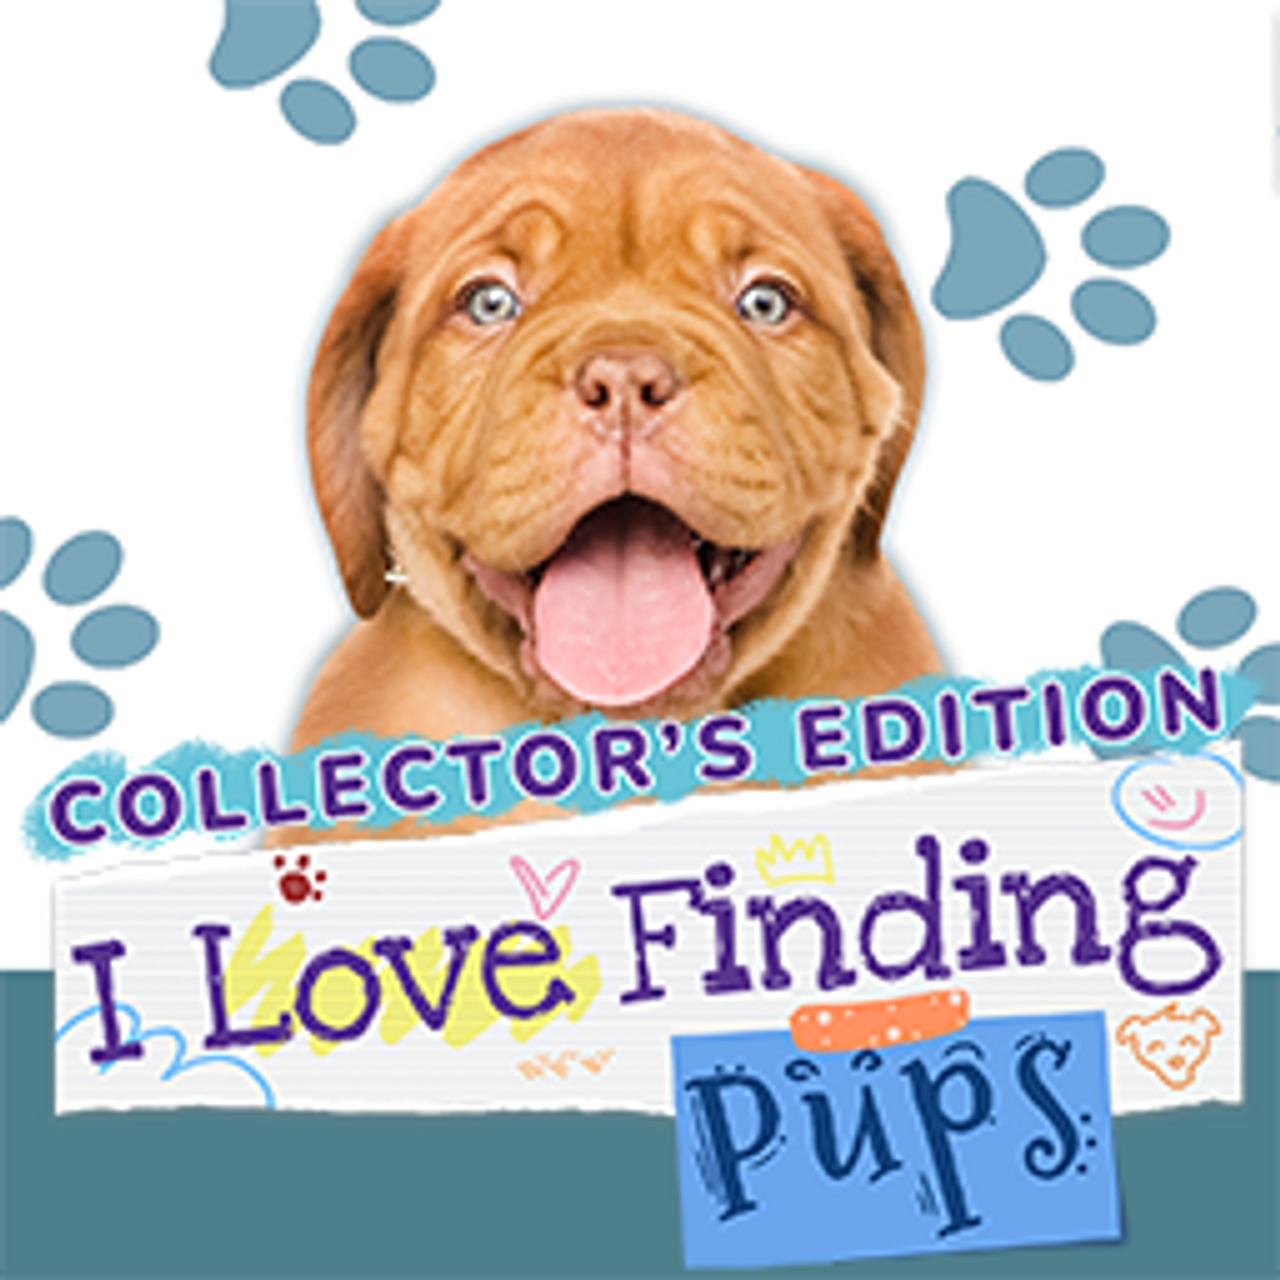 I Love Finding Pups! Collector's Edition